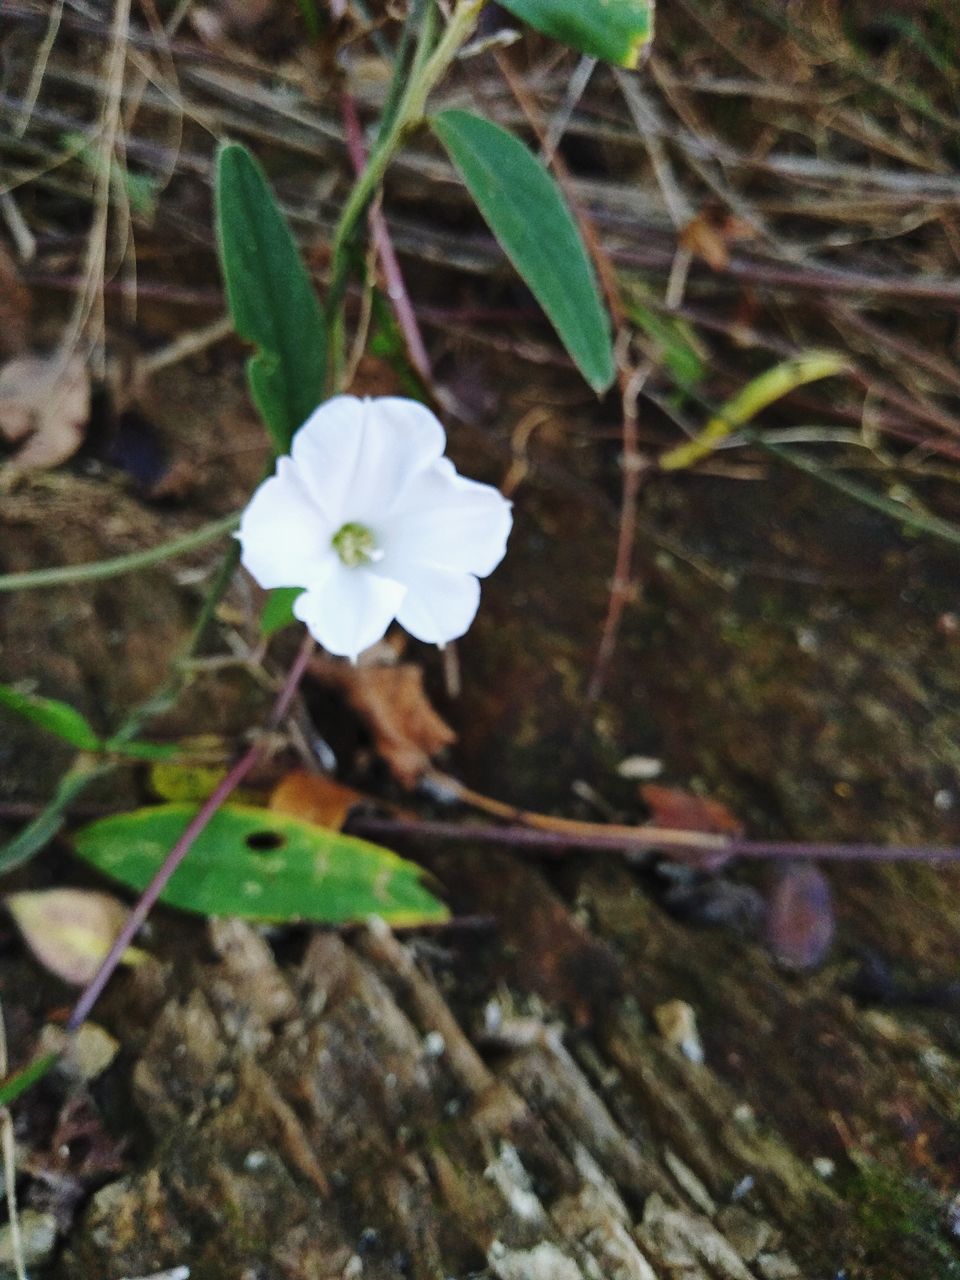 CLOSE-UP OF WHITE FLOWERING PLANT ON FIELD